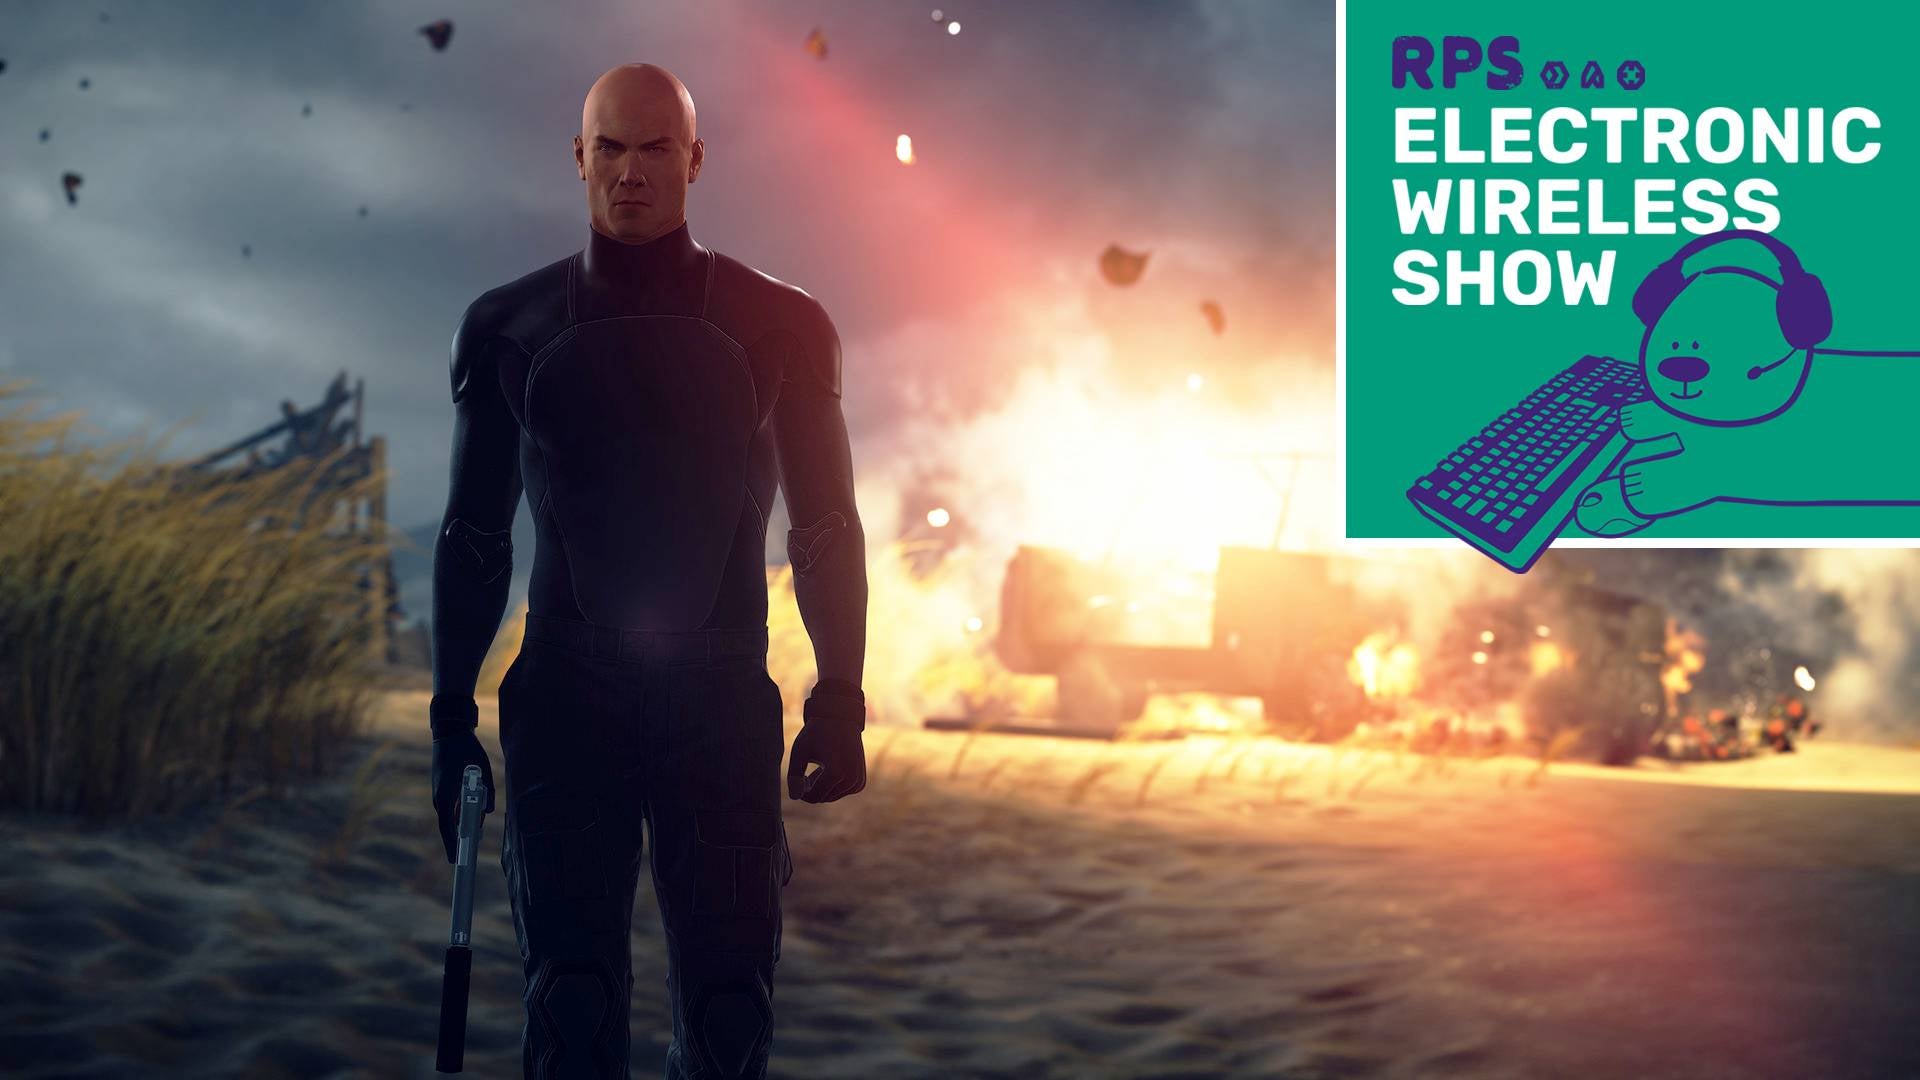 A screenshot of Agent 47 (Ian Hitman) walking away from an exploding truck on a beach, looking all cool, with the Electronic Wireless Show podcast logo overlaid in the top right corner